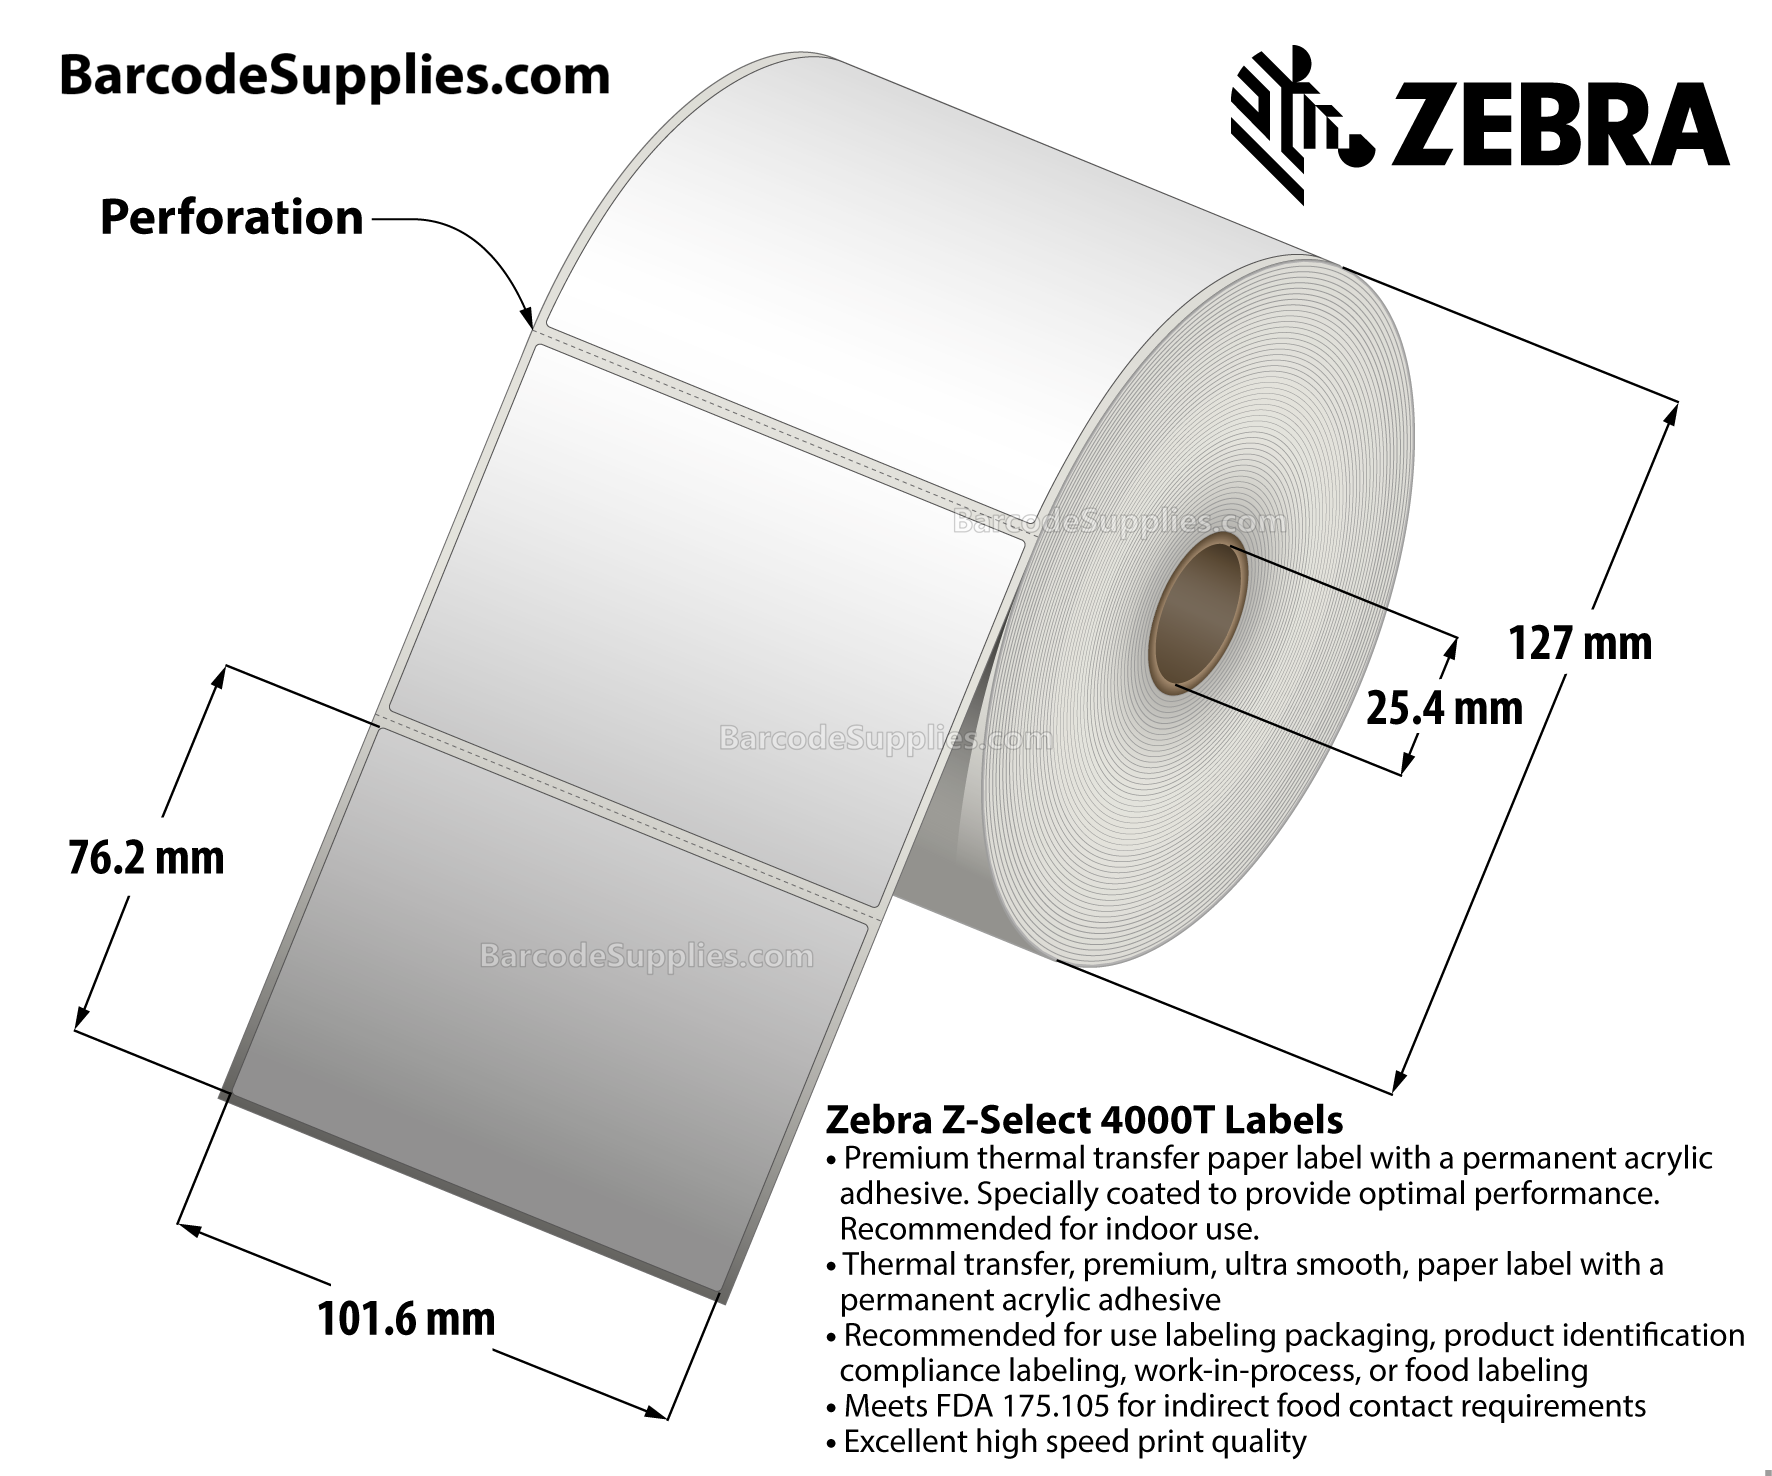 4 x 3 Thermal Transfer White Z-Select 4000T Labels With Permanent Adhesive - Perforated - 930 Labels Per Roll - Carton Of 12 Rolls - 11160 Labels Total - MPN: 800274-305